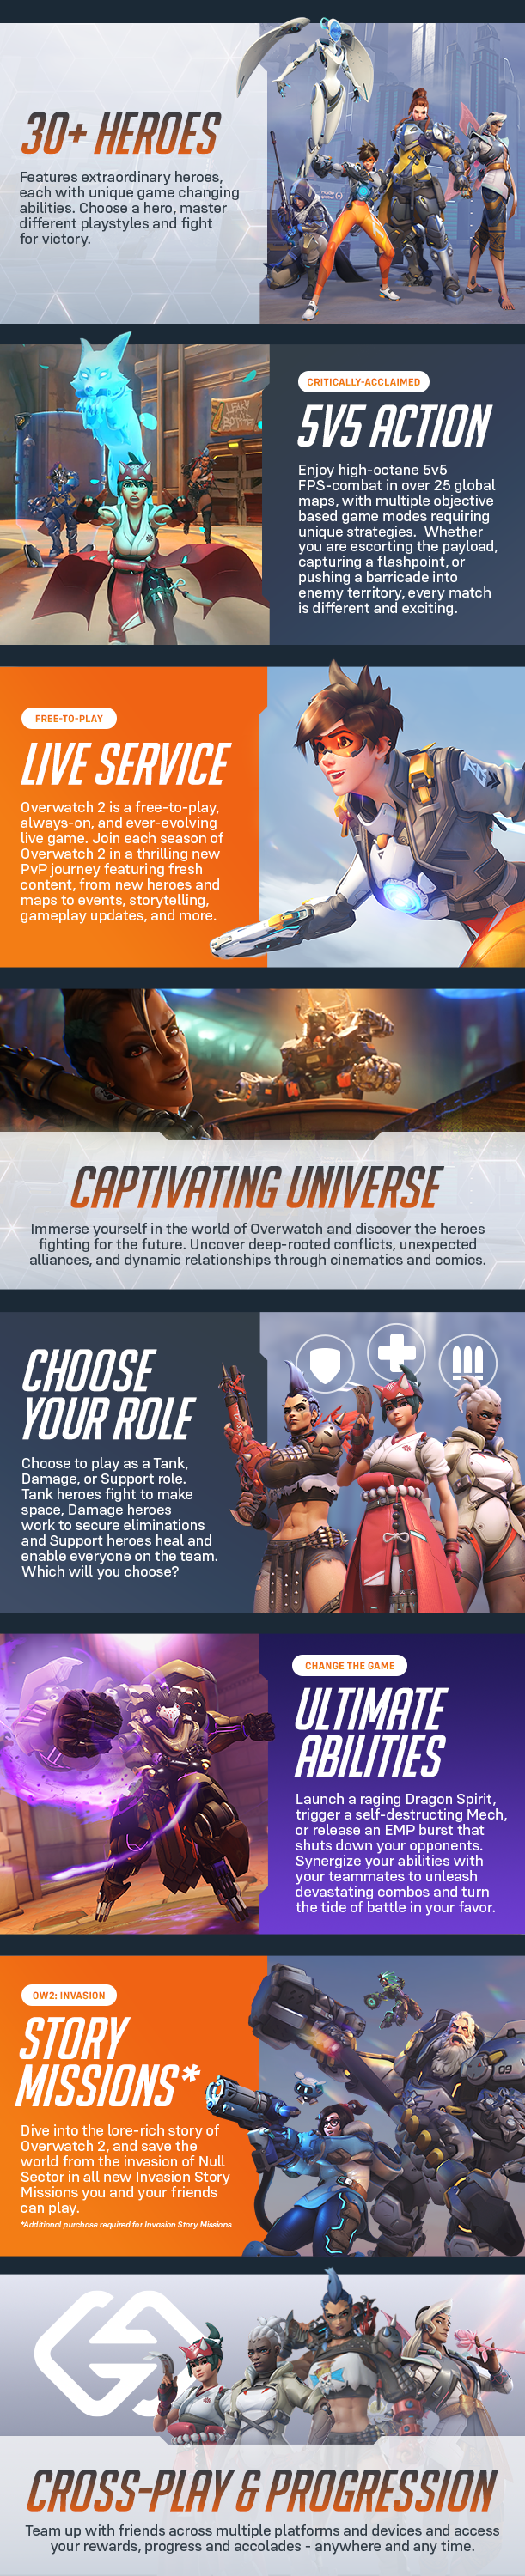 Overwatch 2 crossplay – can you play with friends across platforms?